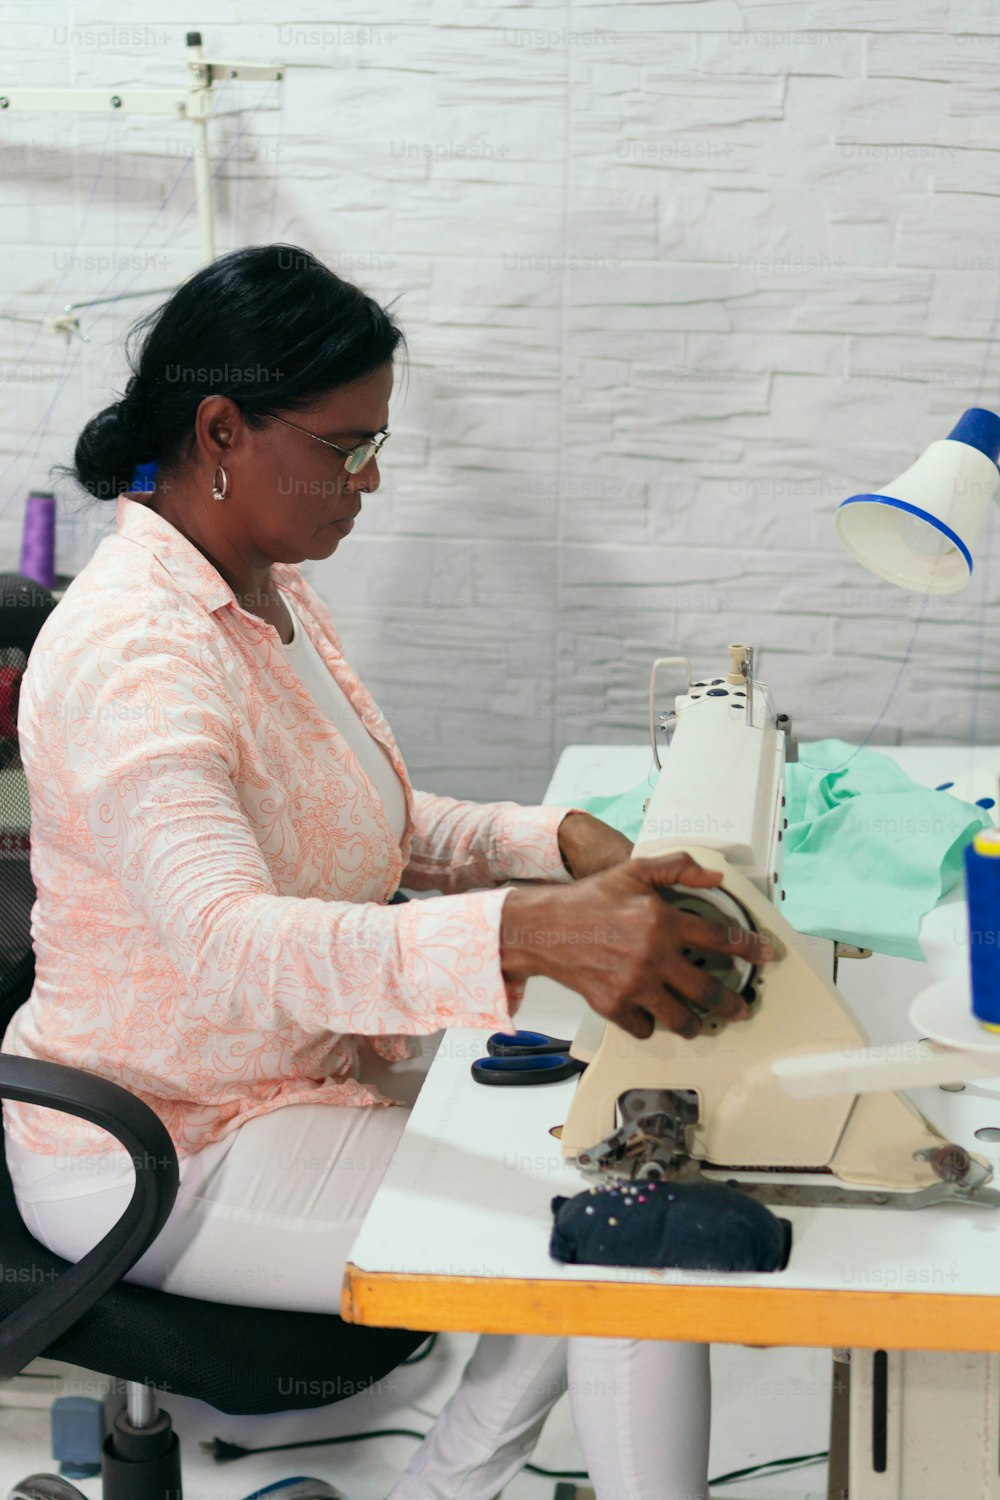 African dressmaker creating a new collection of clothing design. Tailoring and sewing. Lifestyle and business occupation